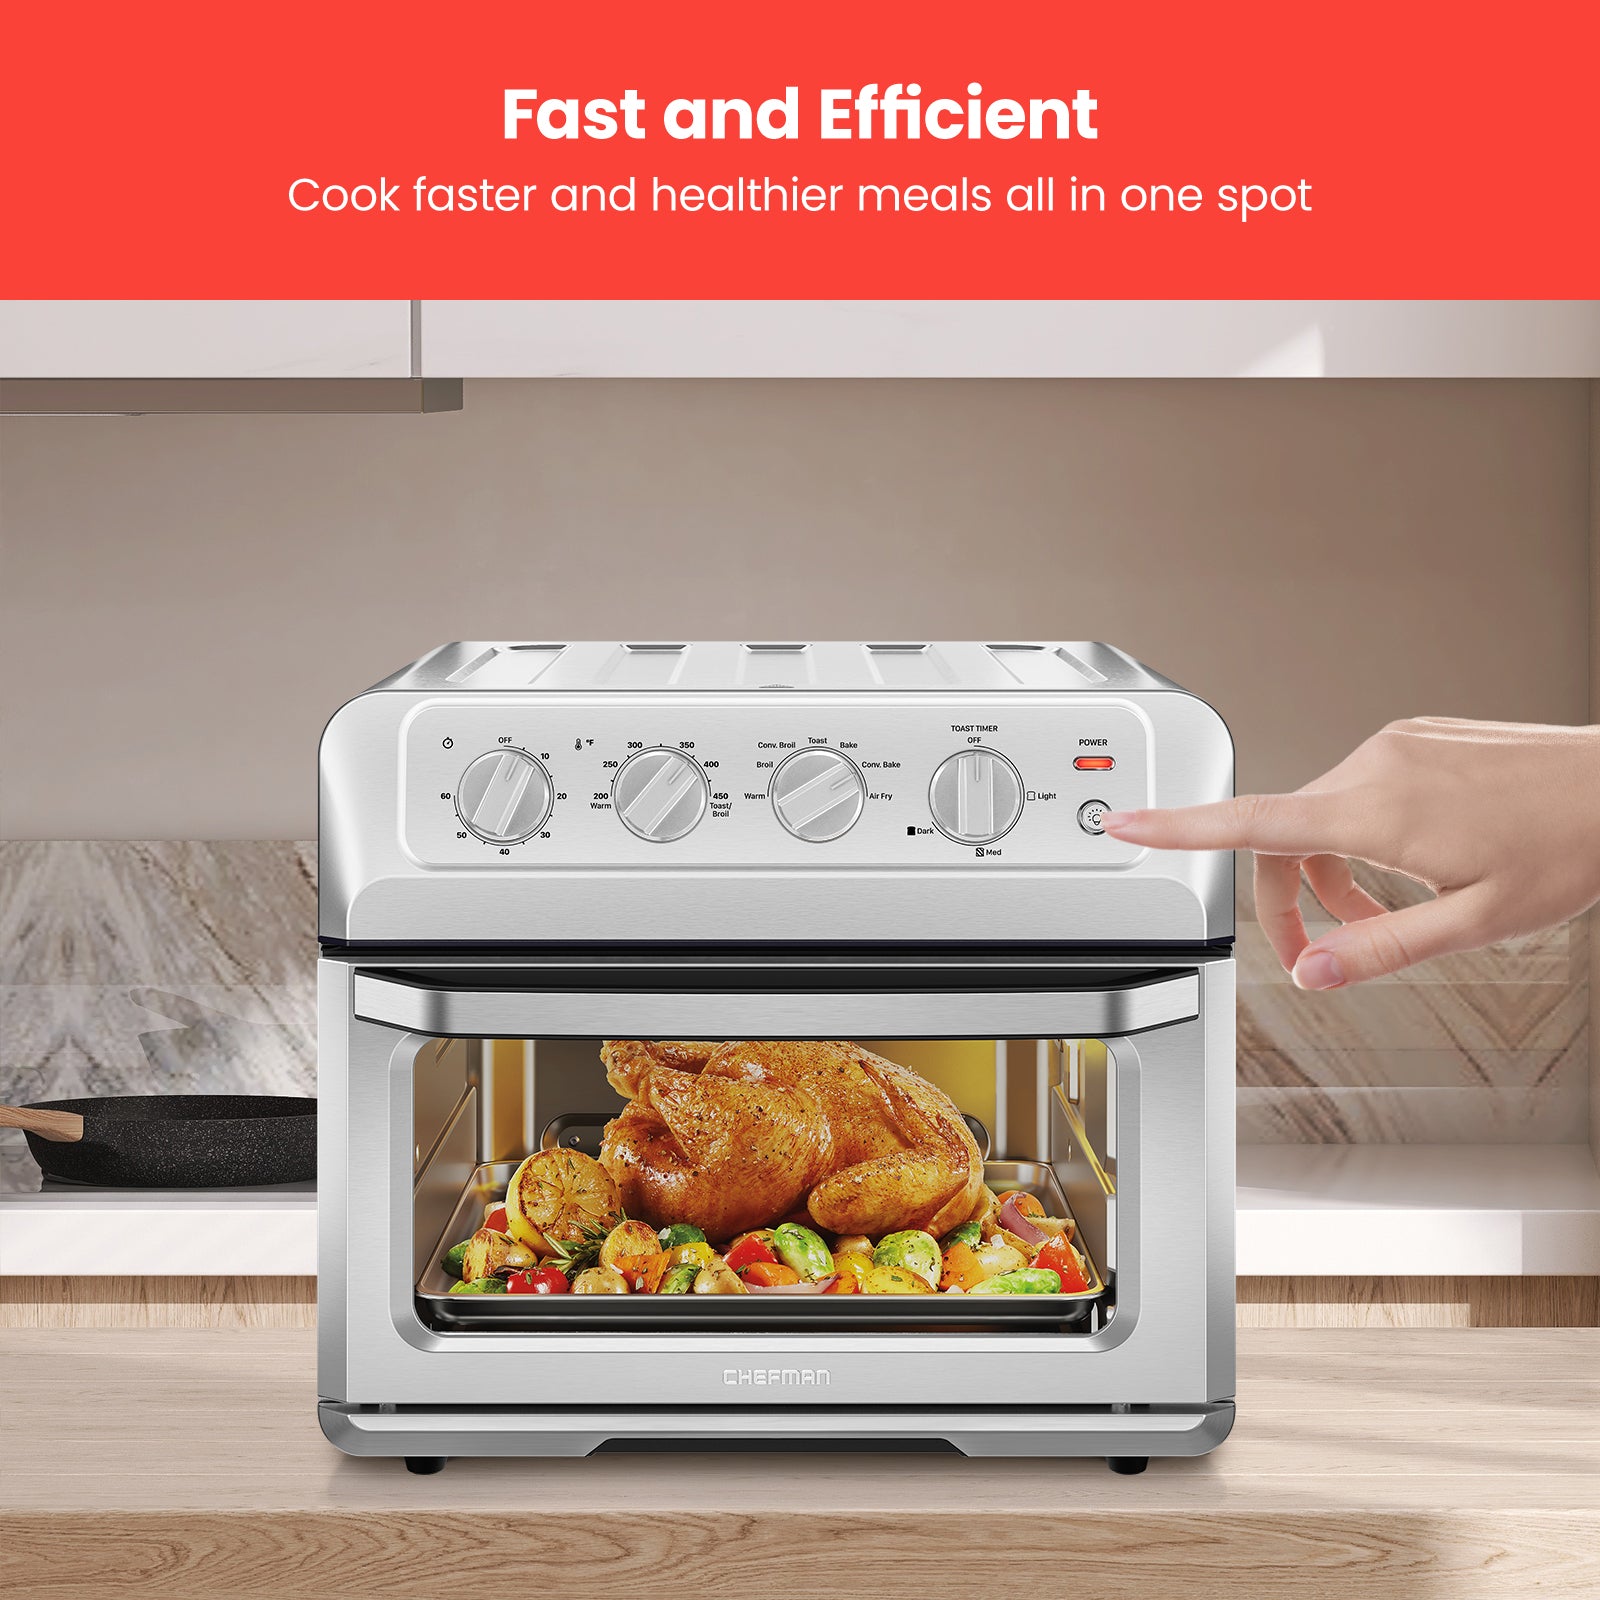 Cook a whole chicken in this Chefman air fryer toaster oven: $100